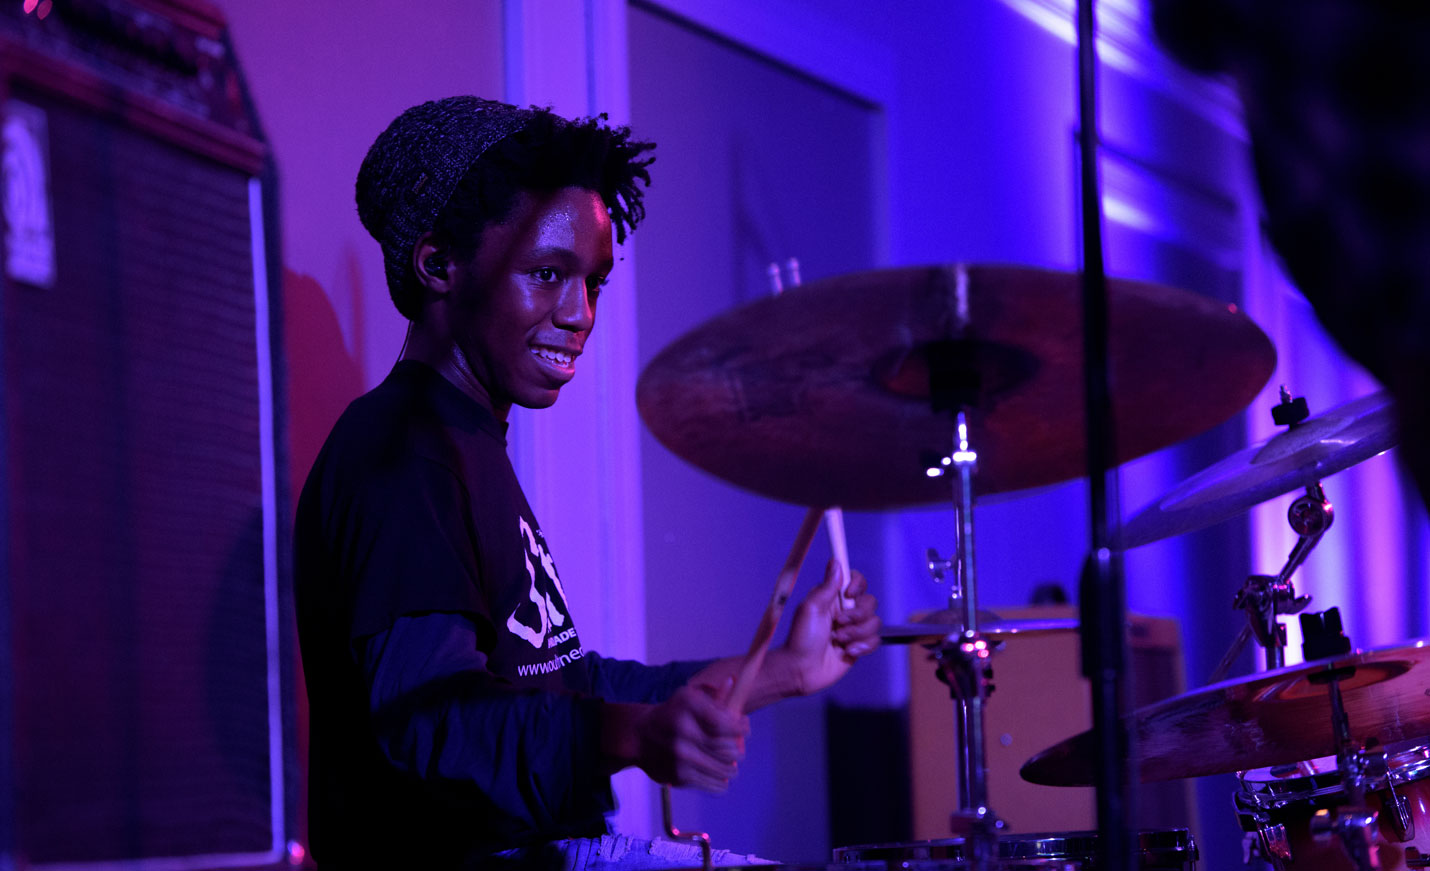 Student Drummer Participating in Battle of the Bands Competition with Purple Lights